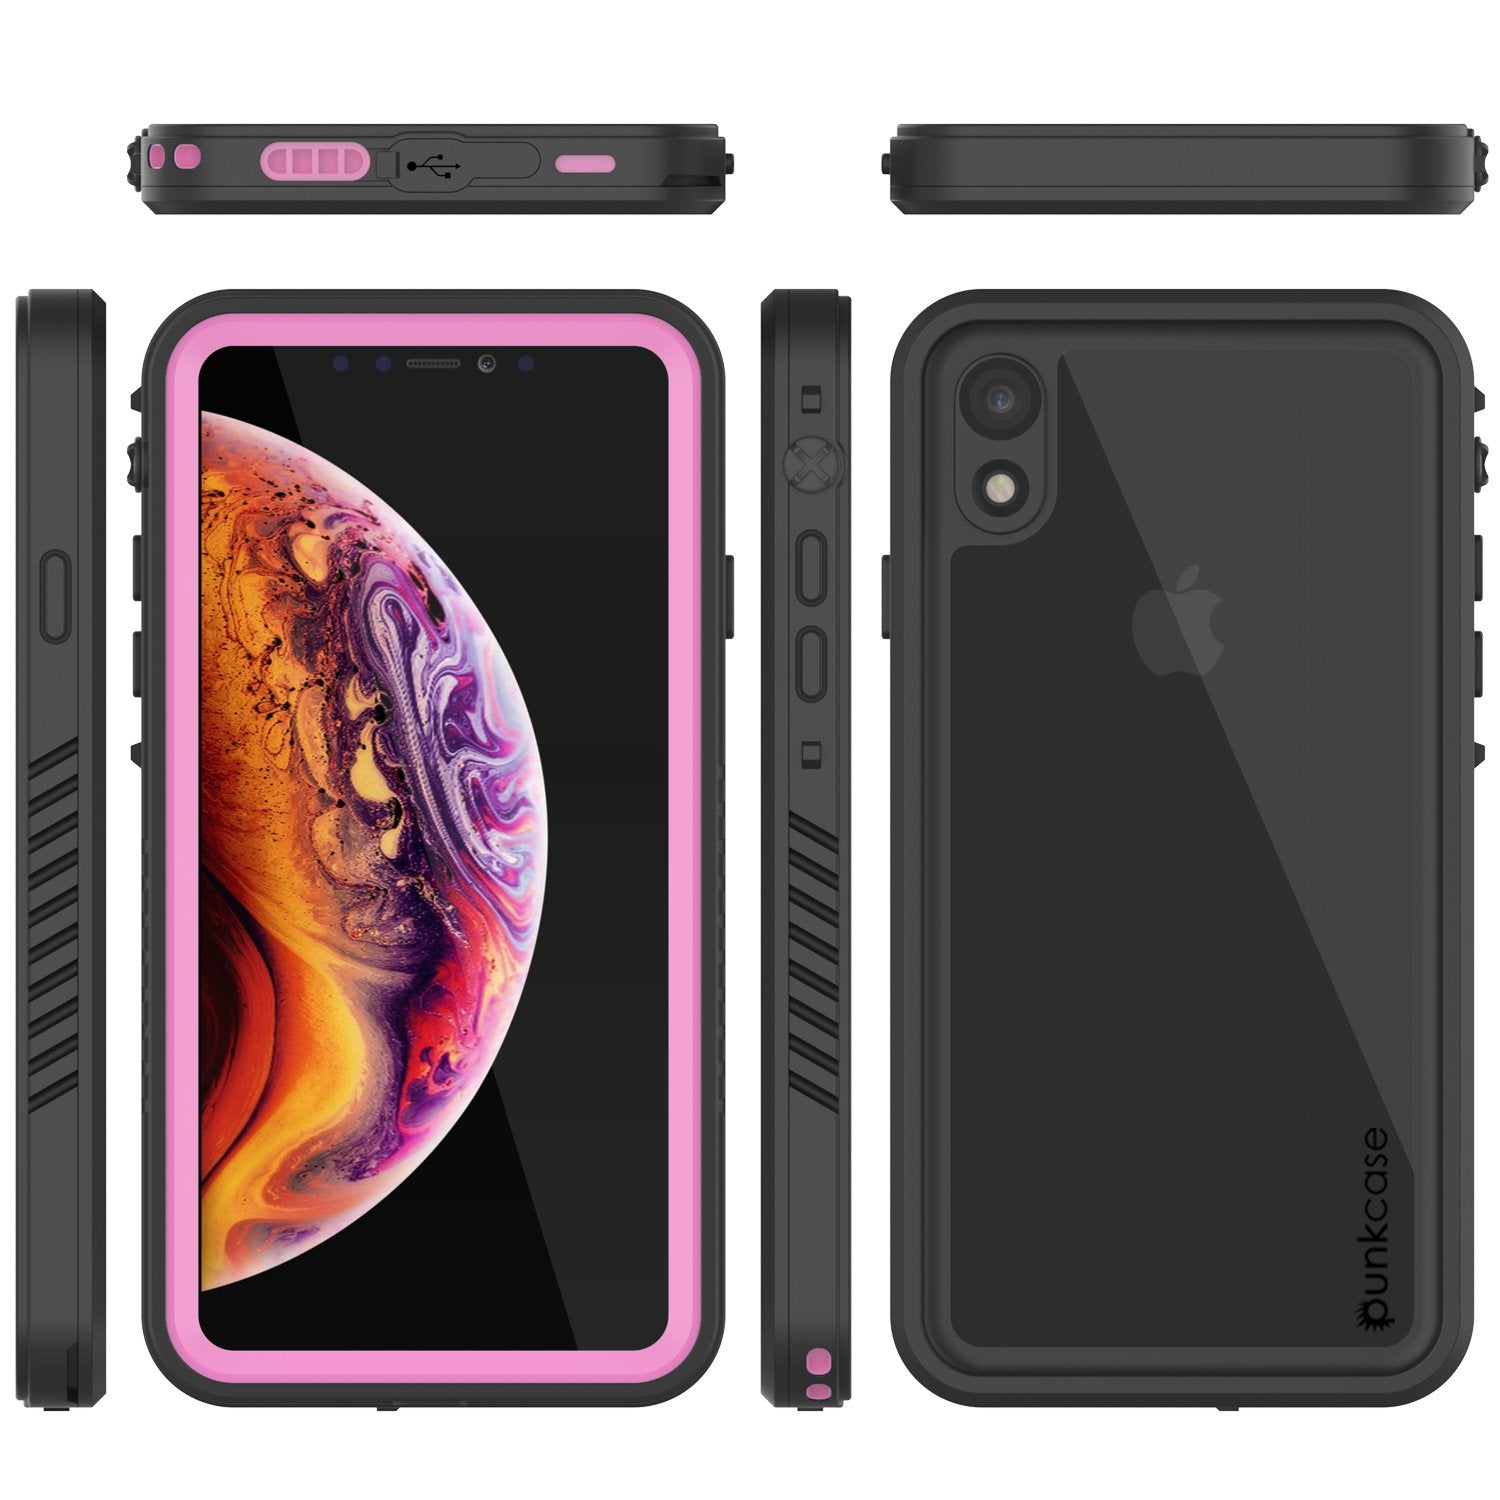 iPhone XR Waterproof Case, Punkcase [Extreme Series] Armor Cover W/ Built In Screen Protector [Pink] - PunkCase NZ